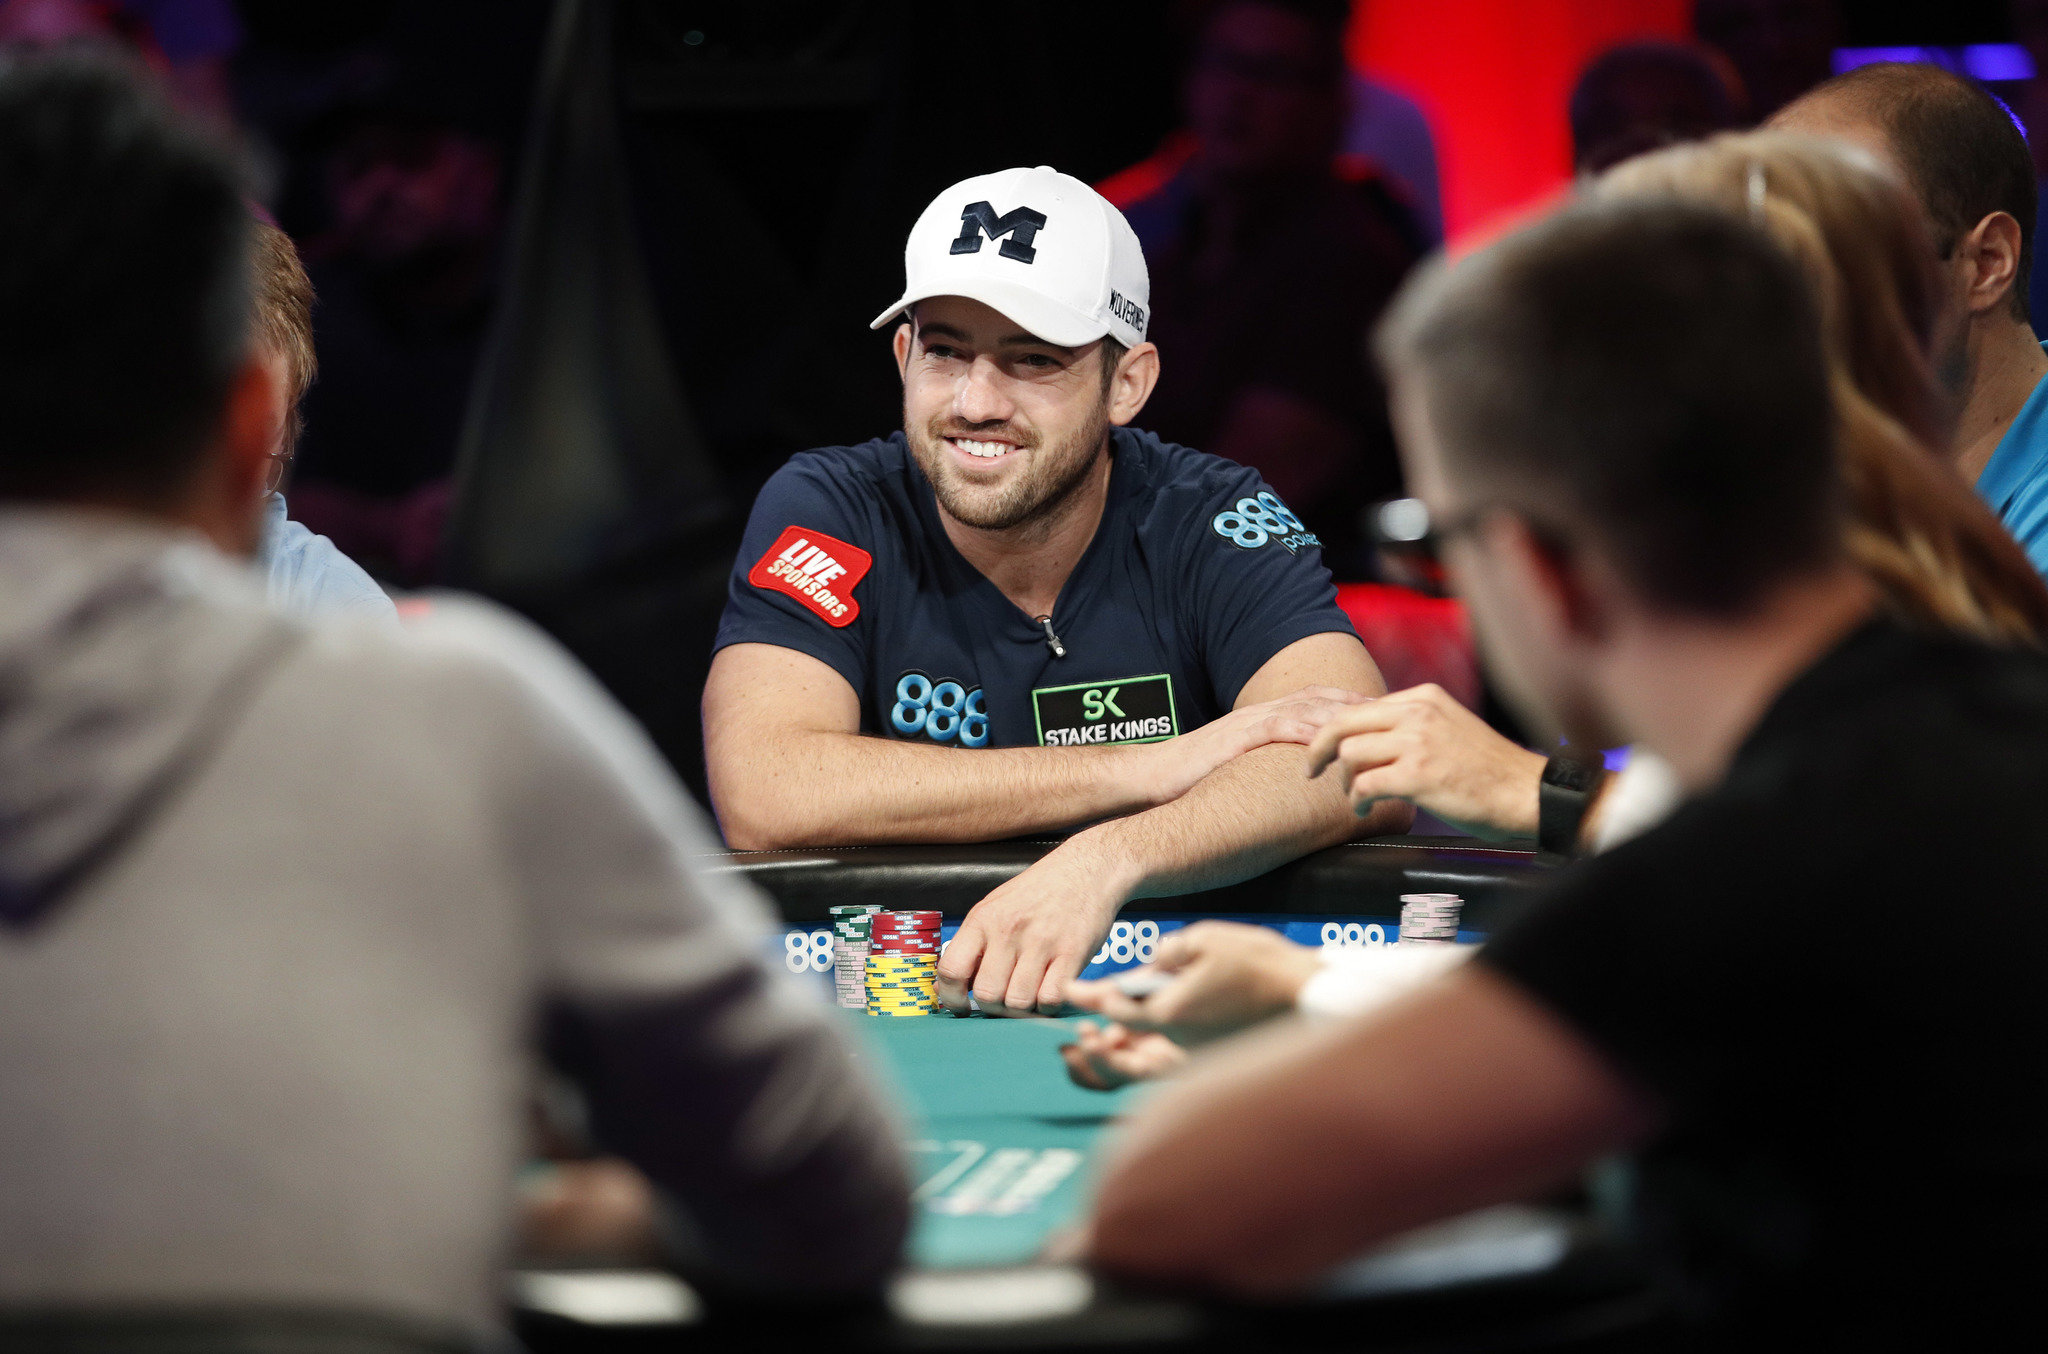 WSOP Main Event 2018 Down to Final Three, Former Champ Joe Cada Out in 5th